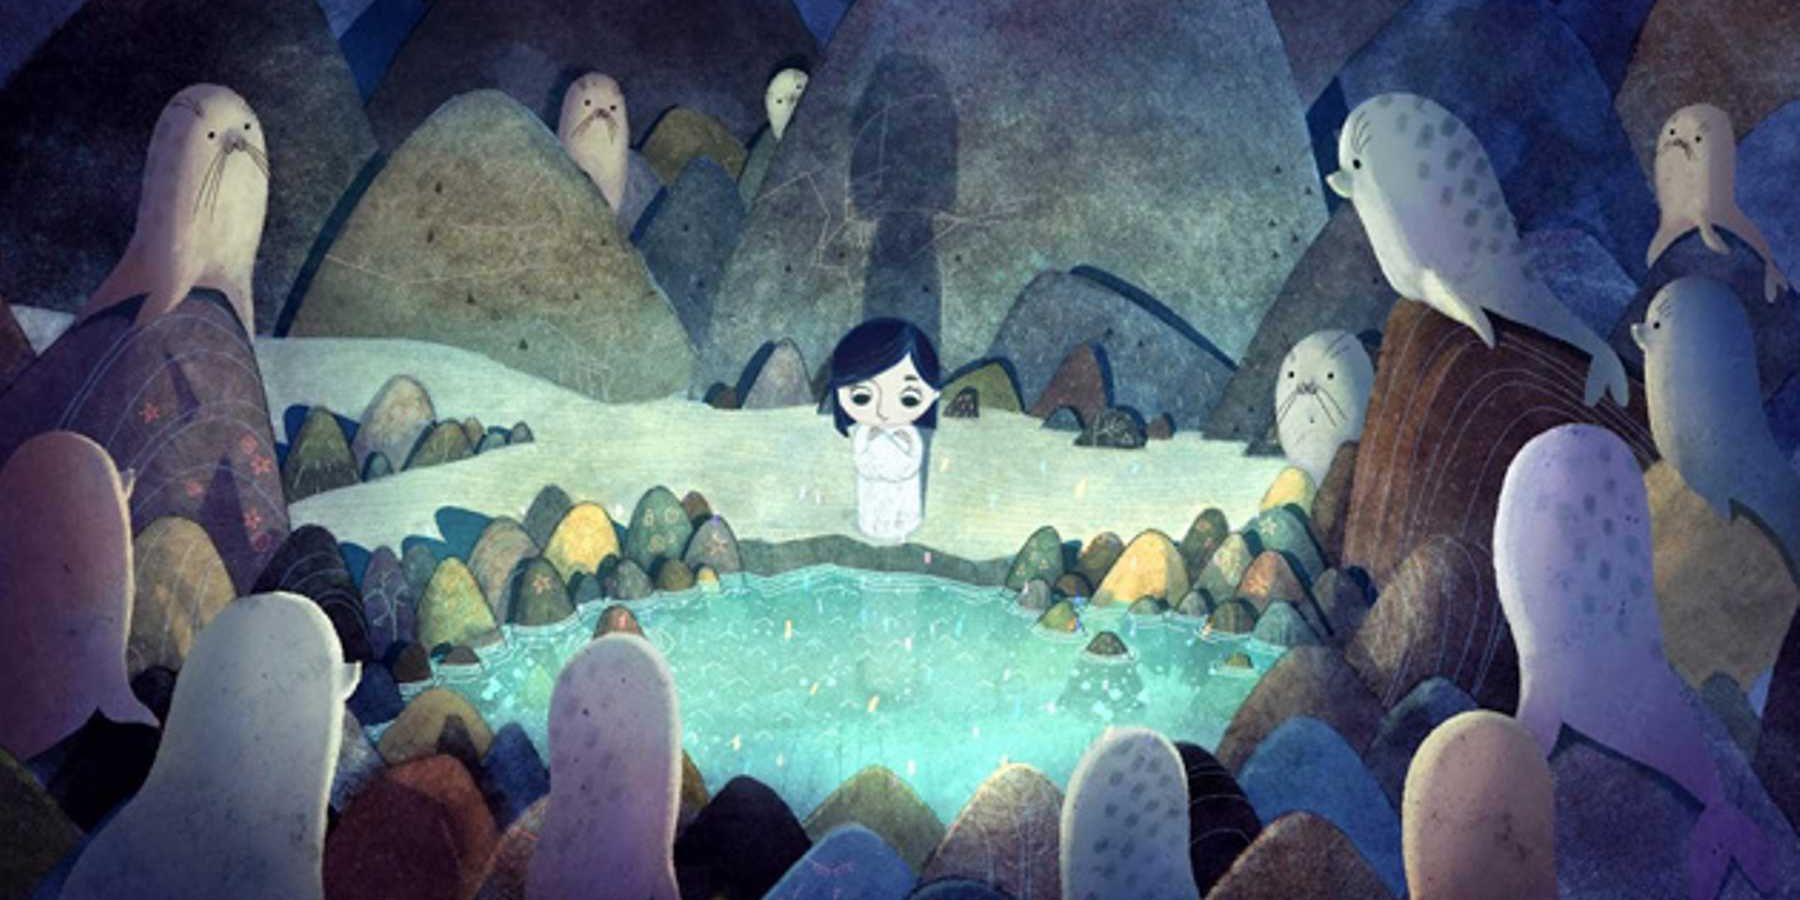 A girl stands by a pond surrounded by creatures in Song of the Sea.